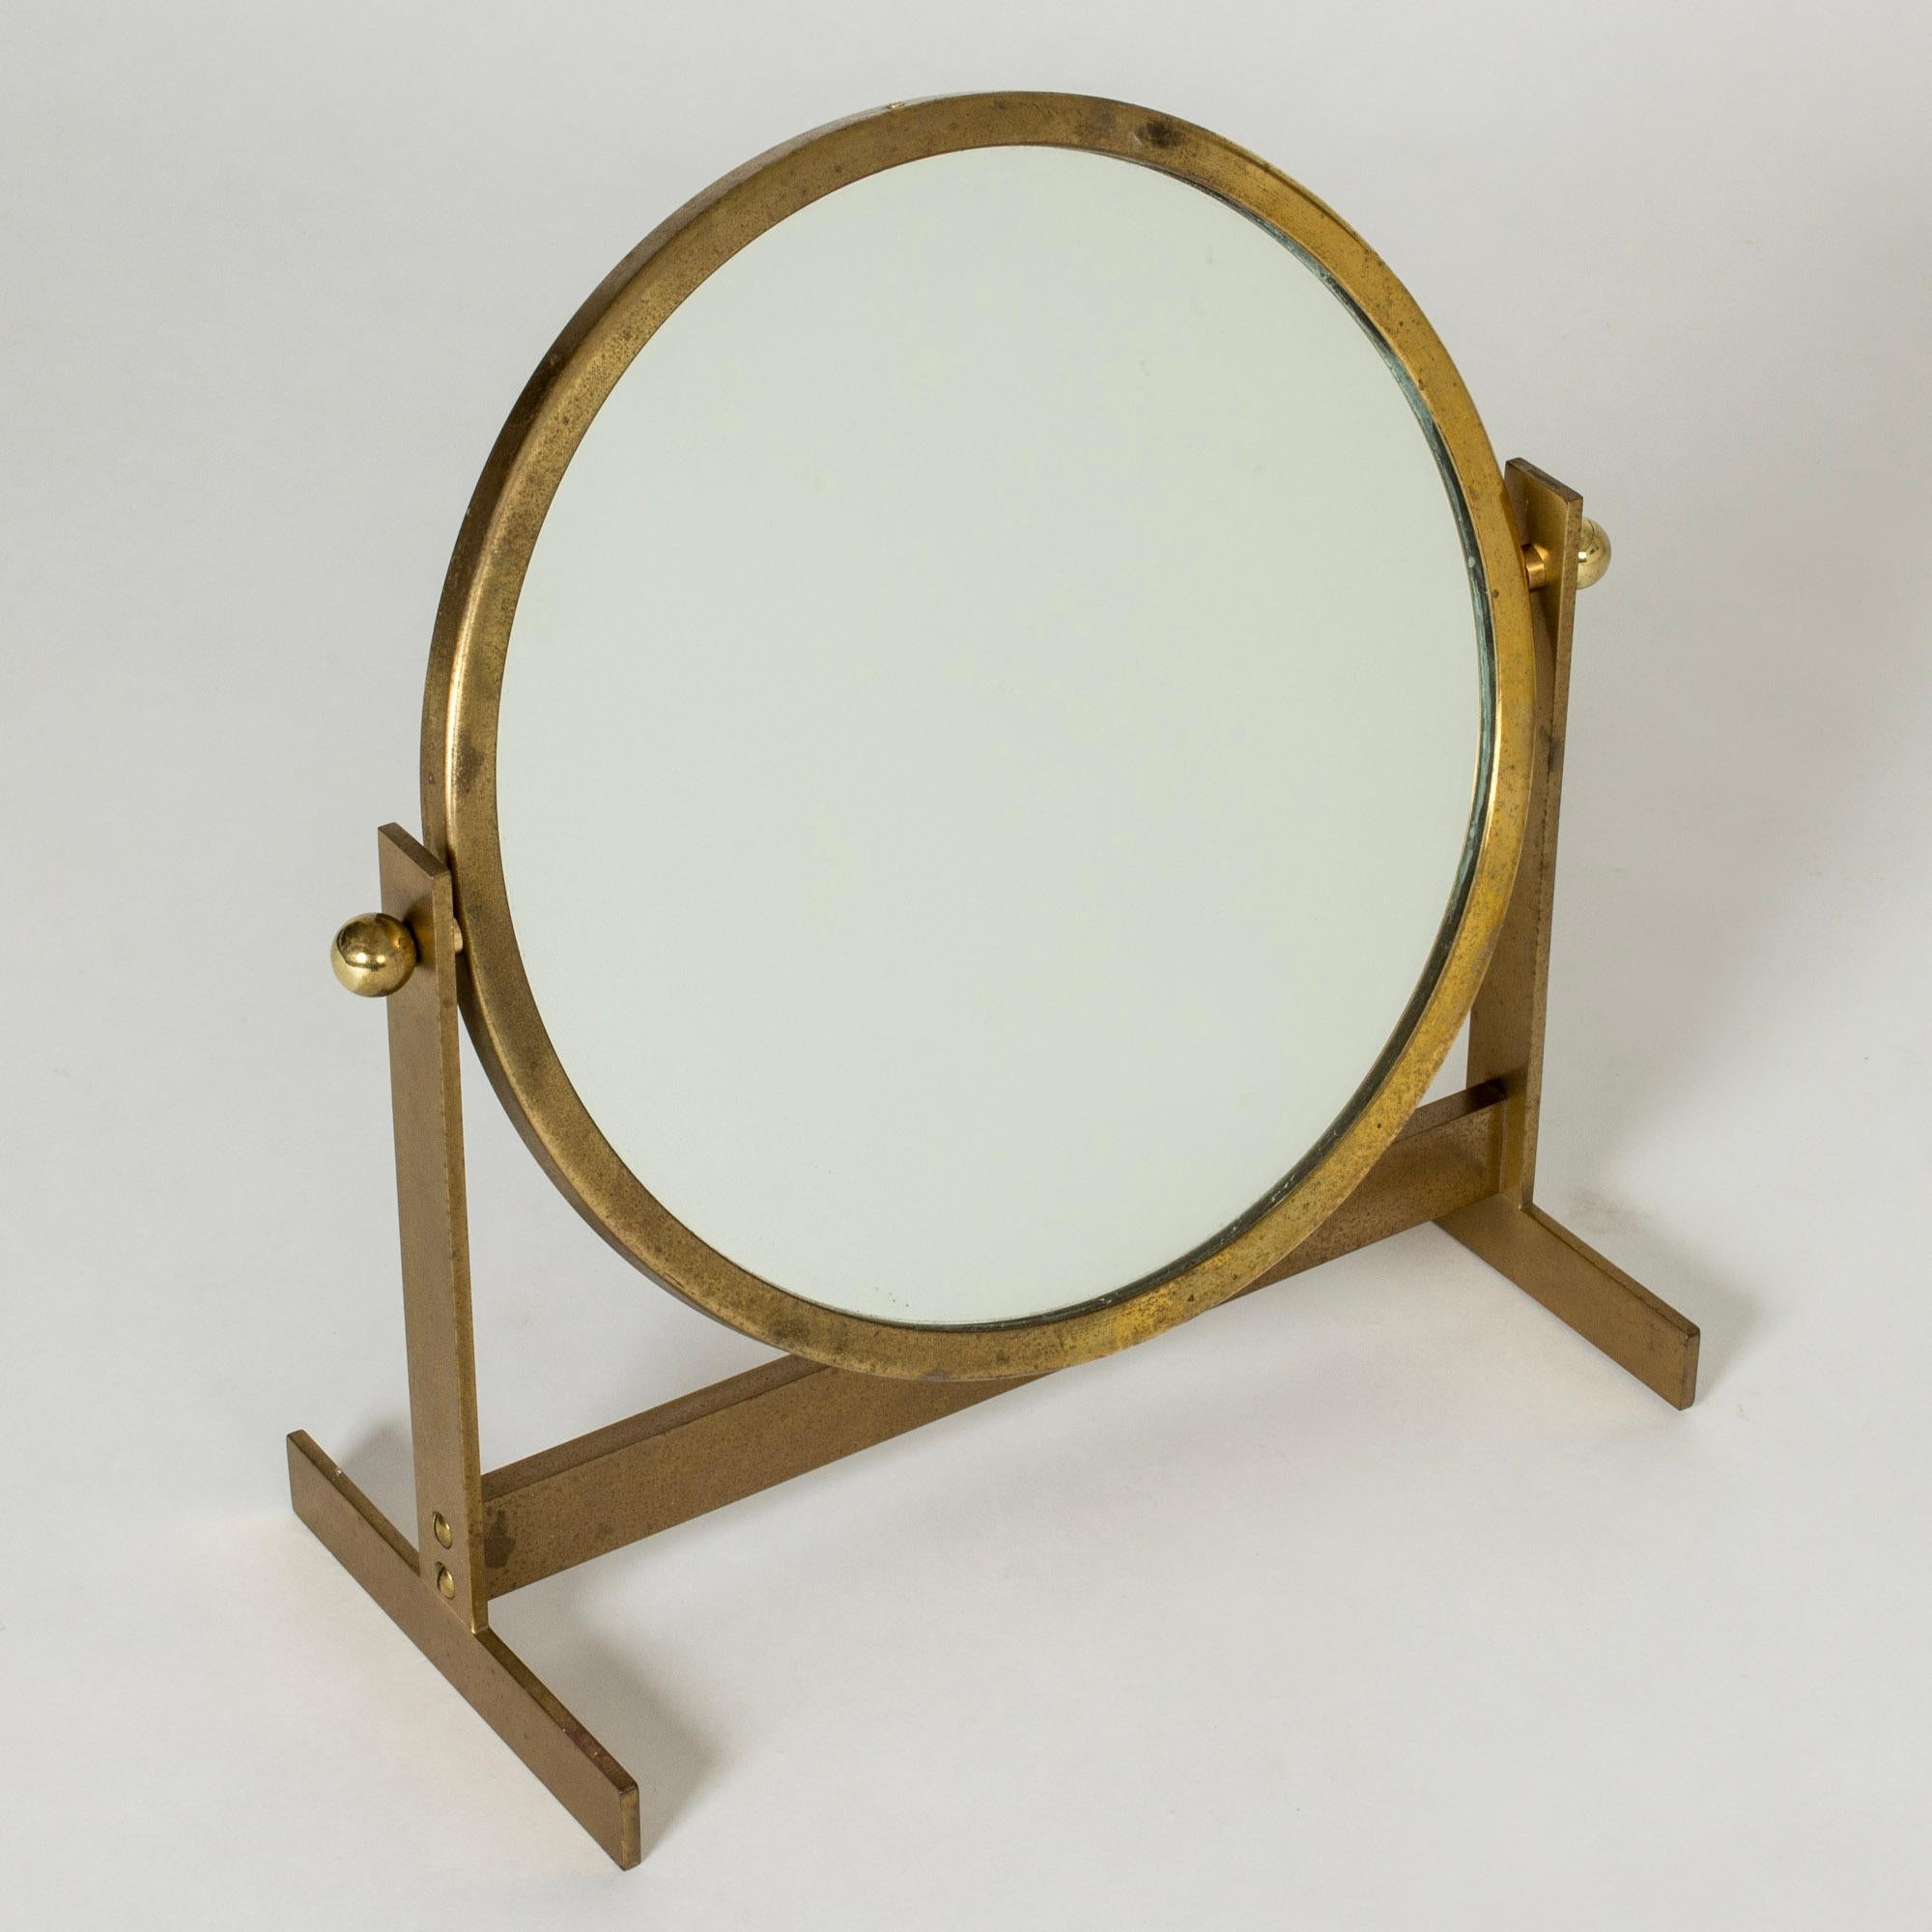 Elegant brass table mirror from HI-gruppen, in a round form in a strict base.